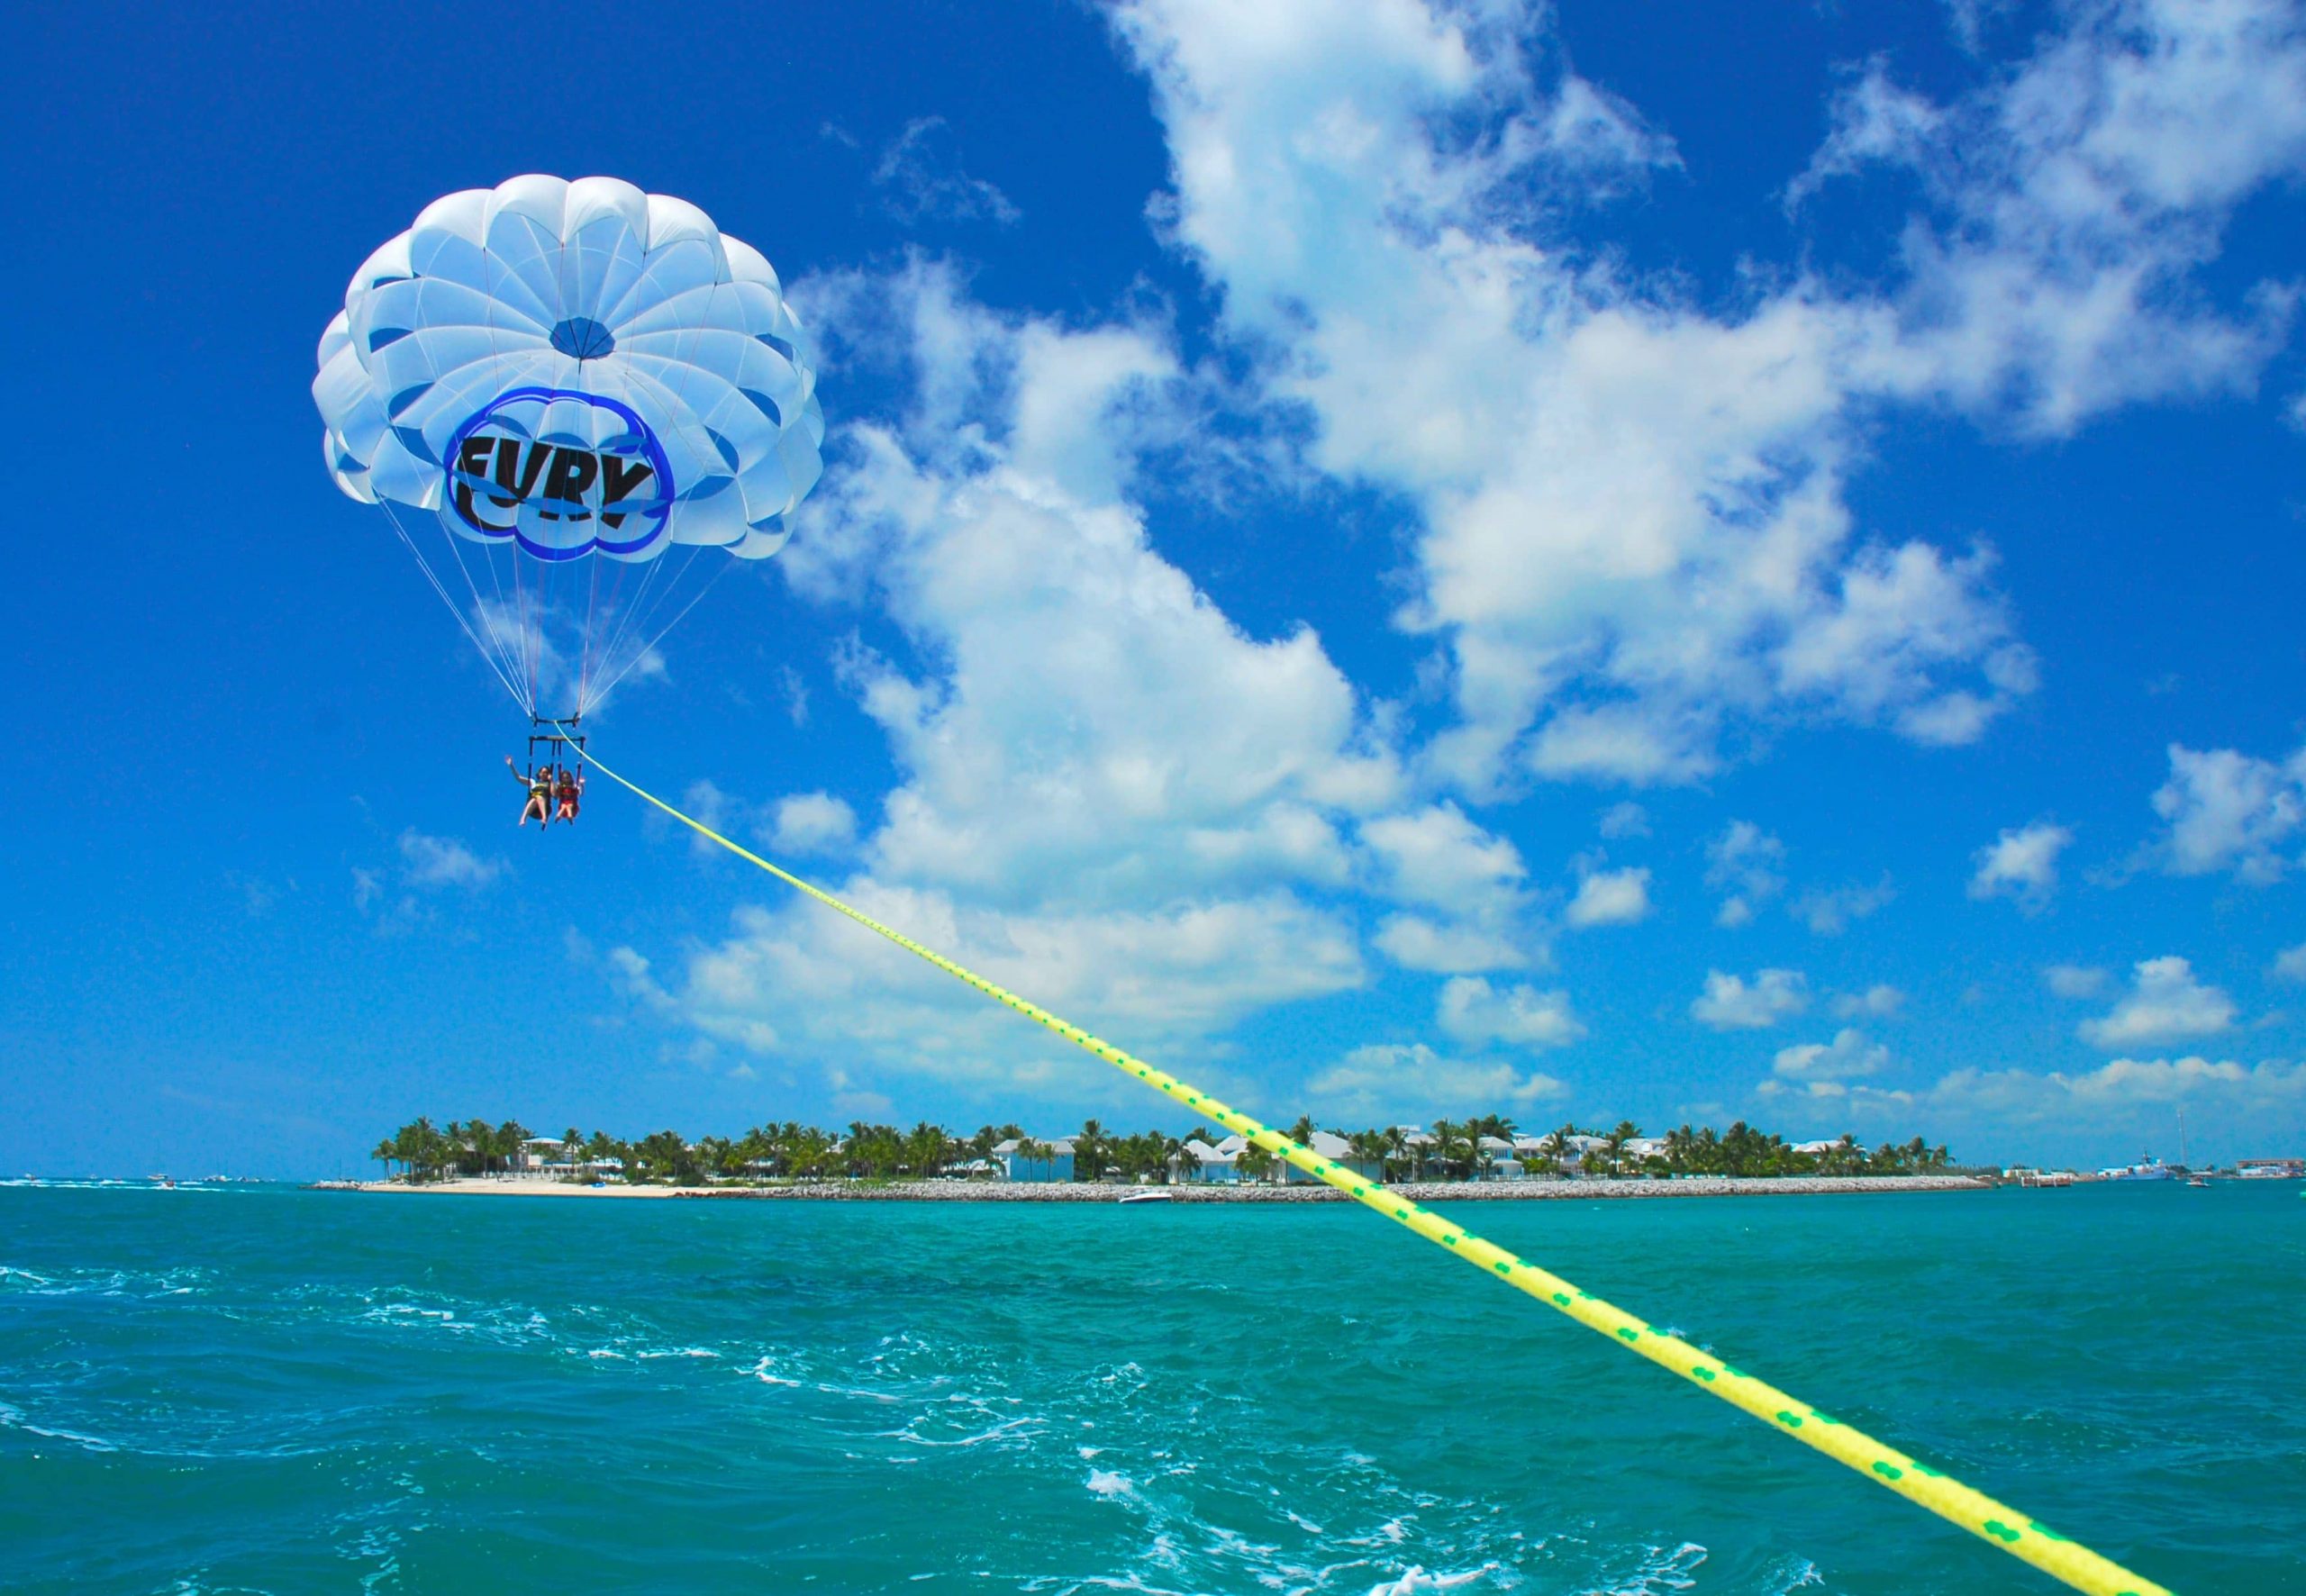 Parasailing as one of the top beach activities in Key West